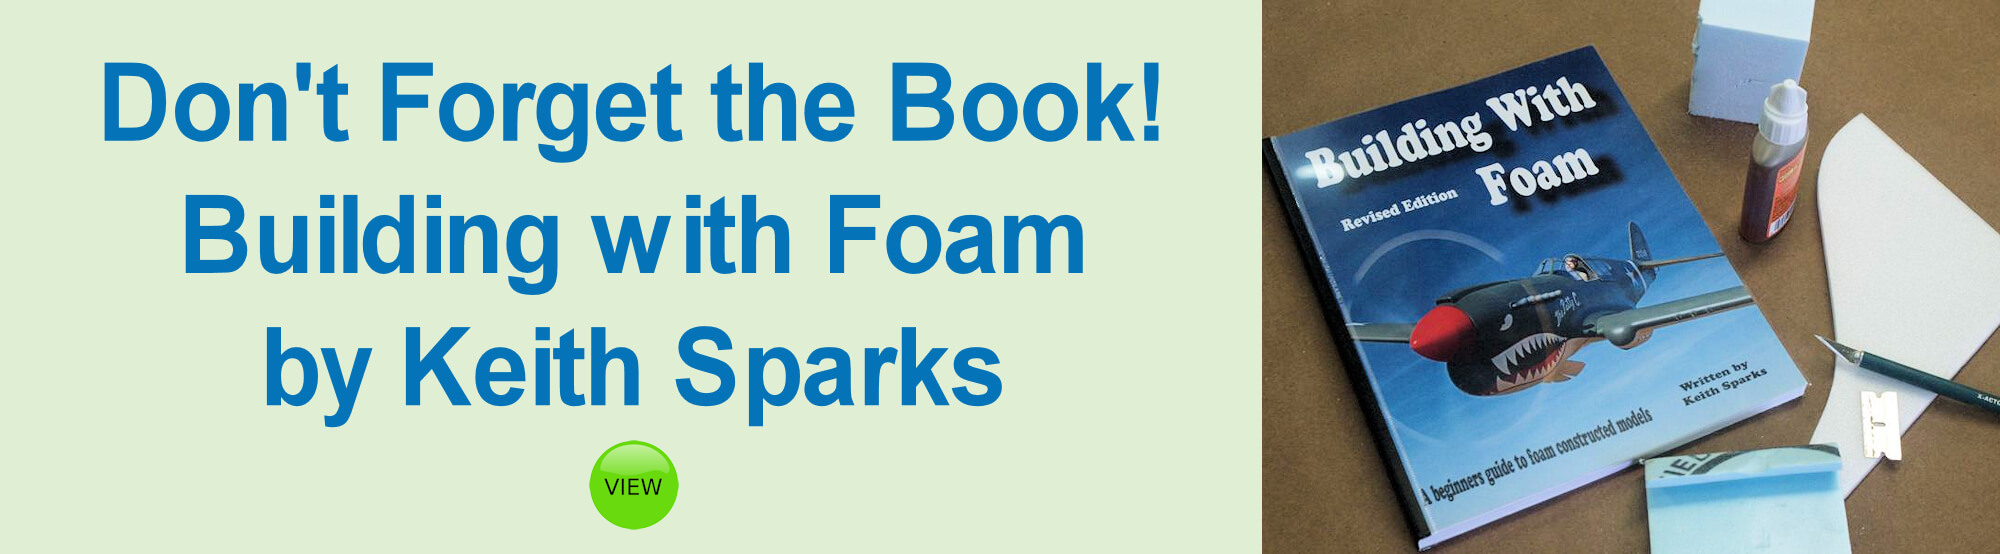 Building with Foam Book